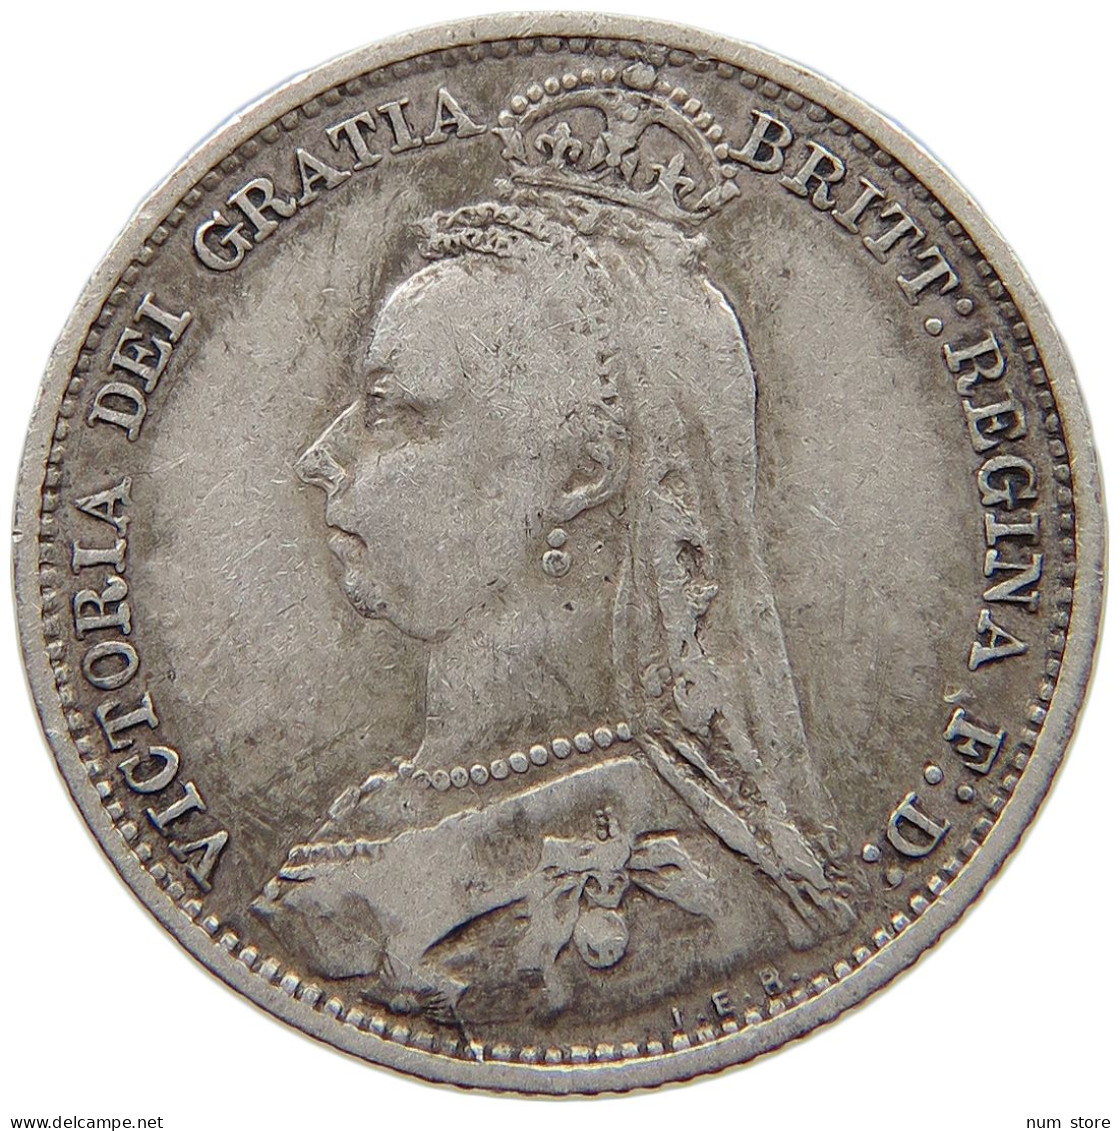 GREAT BRITAIN SIXPENCE 1892 Victoria 1837-1901 #t075 0399 - H. 6 Pence